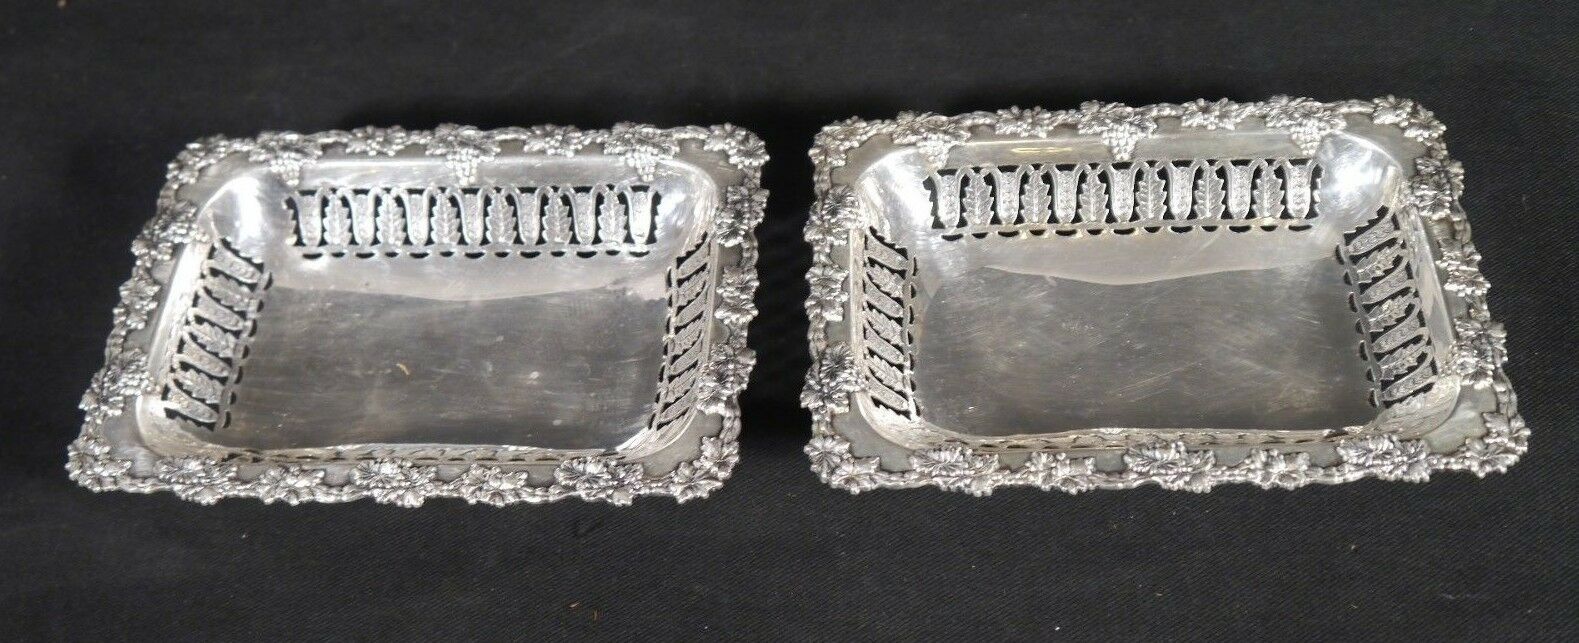 PAIR  Antique or Vintage Silverplate Reticulated Bowls or Small Trays CHELTONHAM